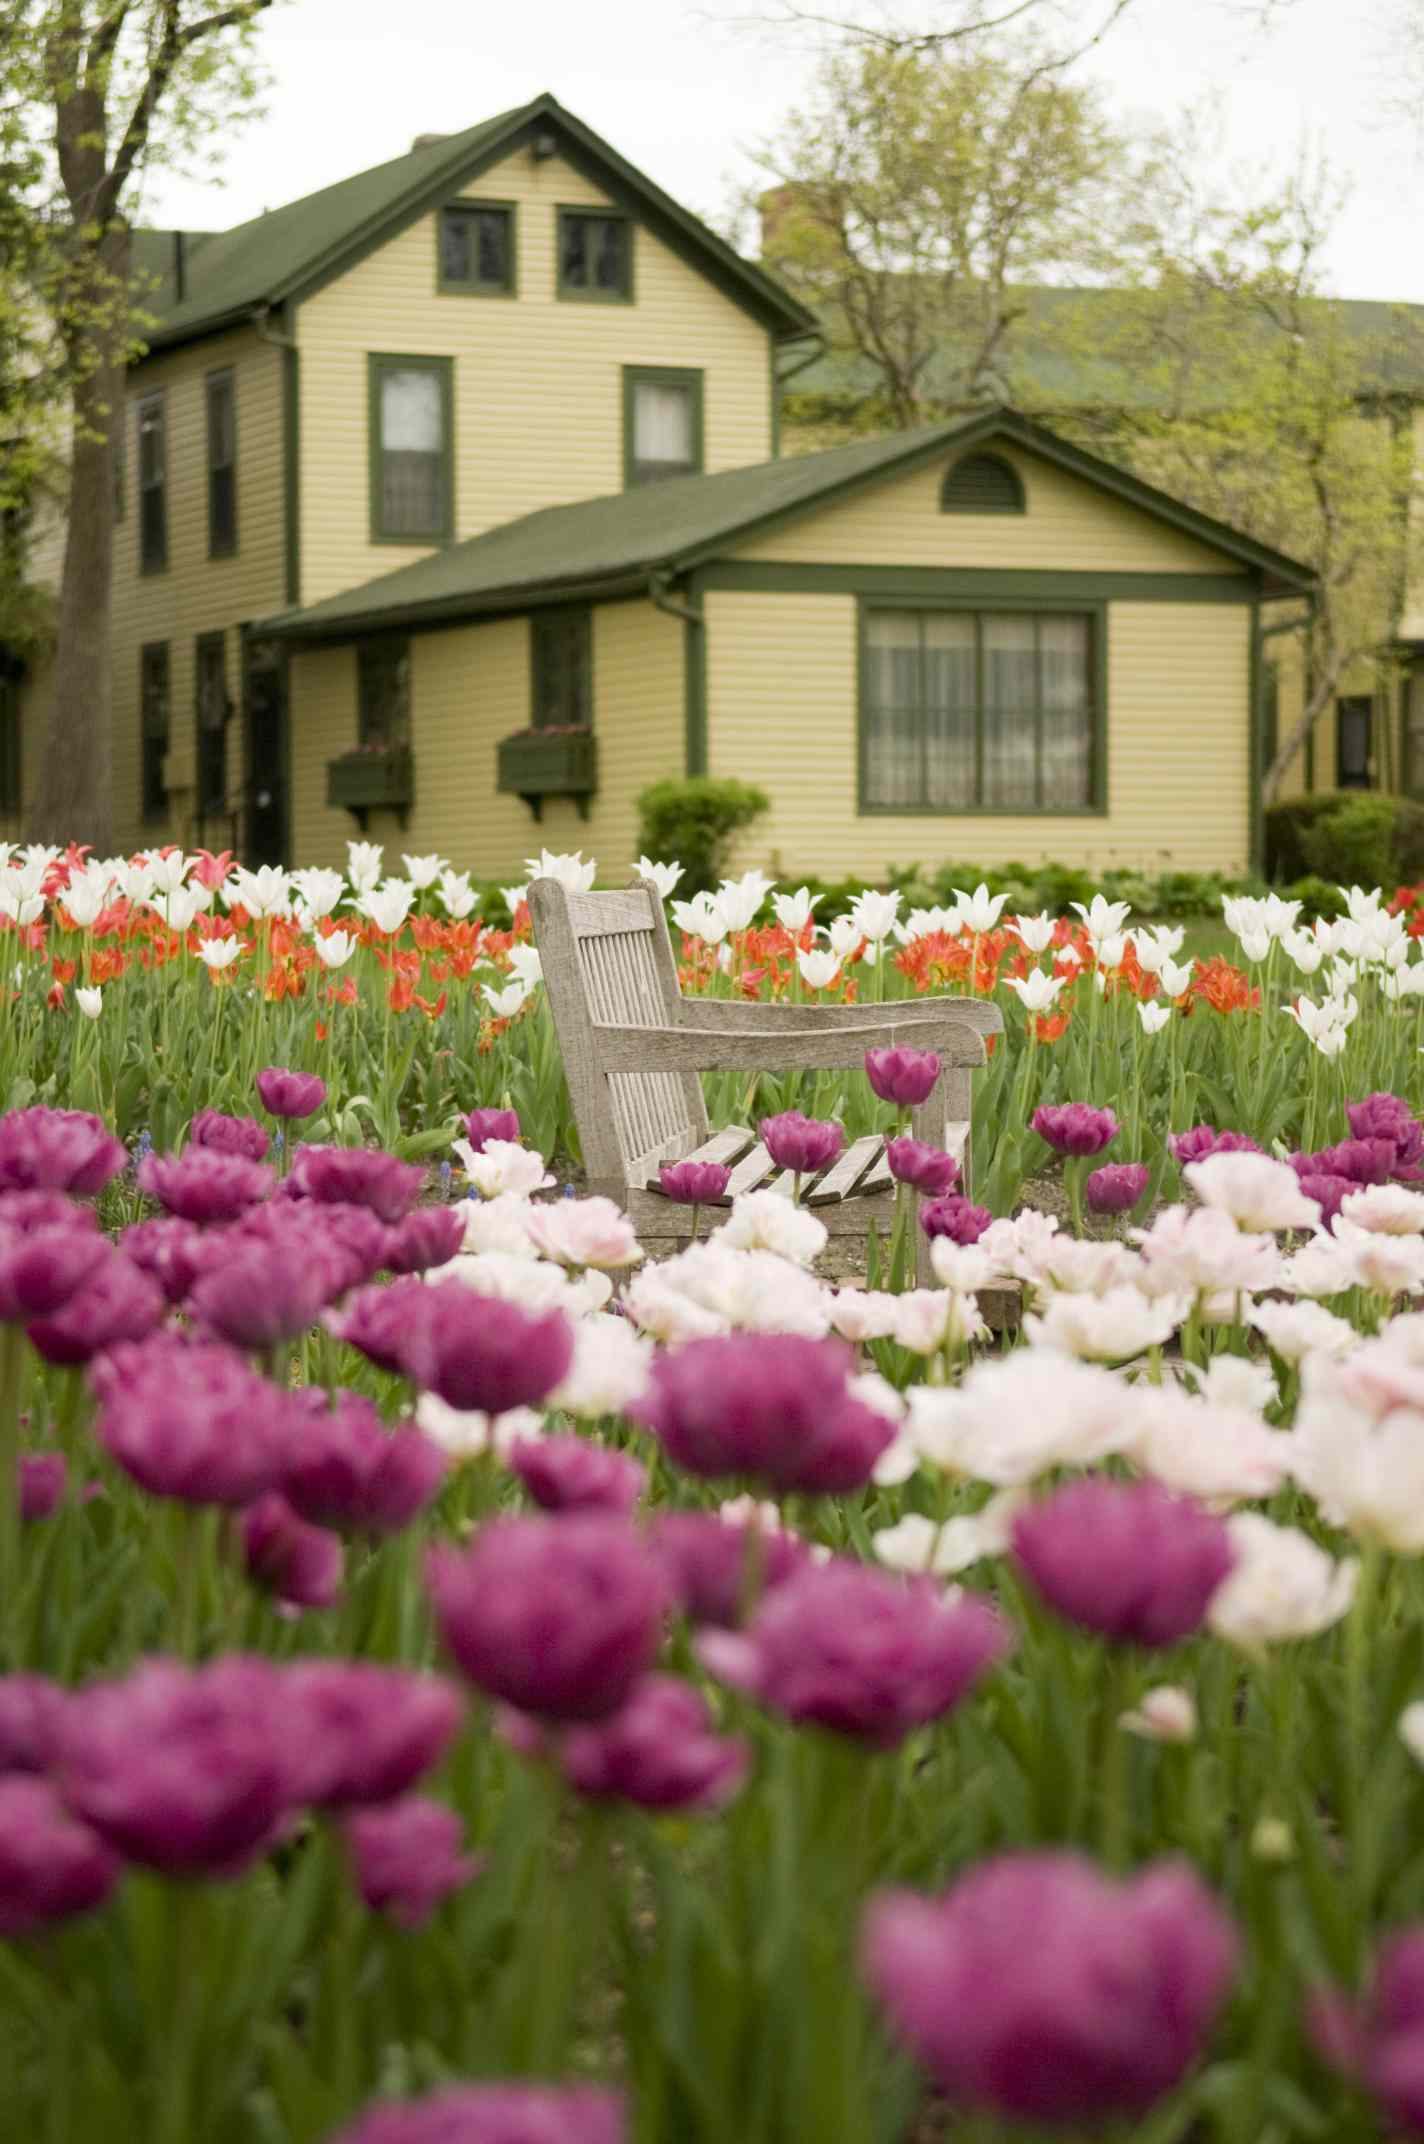 Tulip Time festival celebrates the city’s Dutch heritage with beautiful blooms.